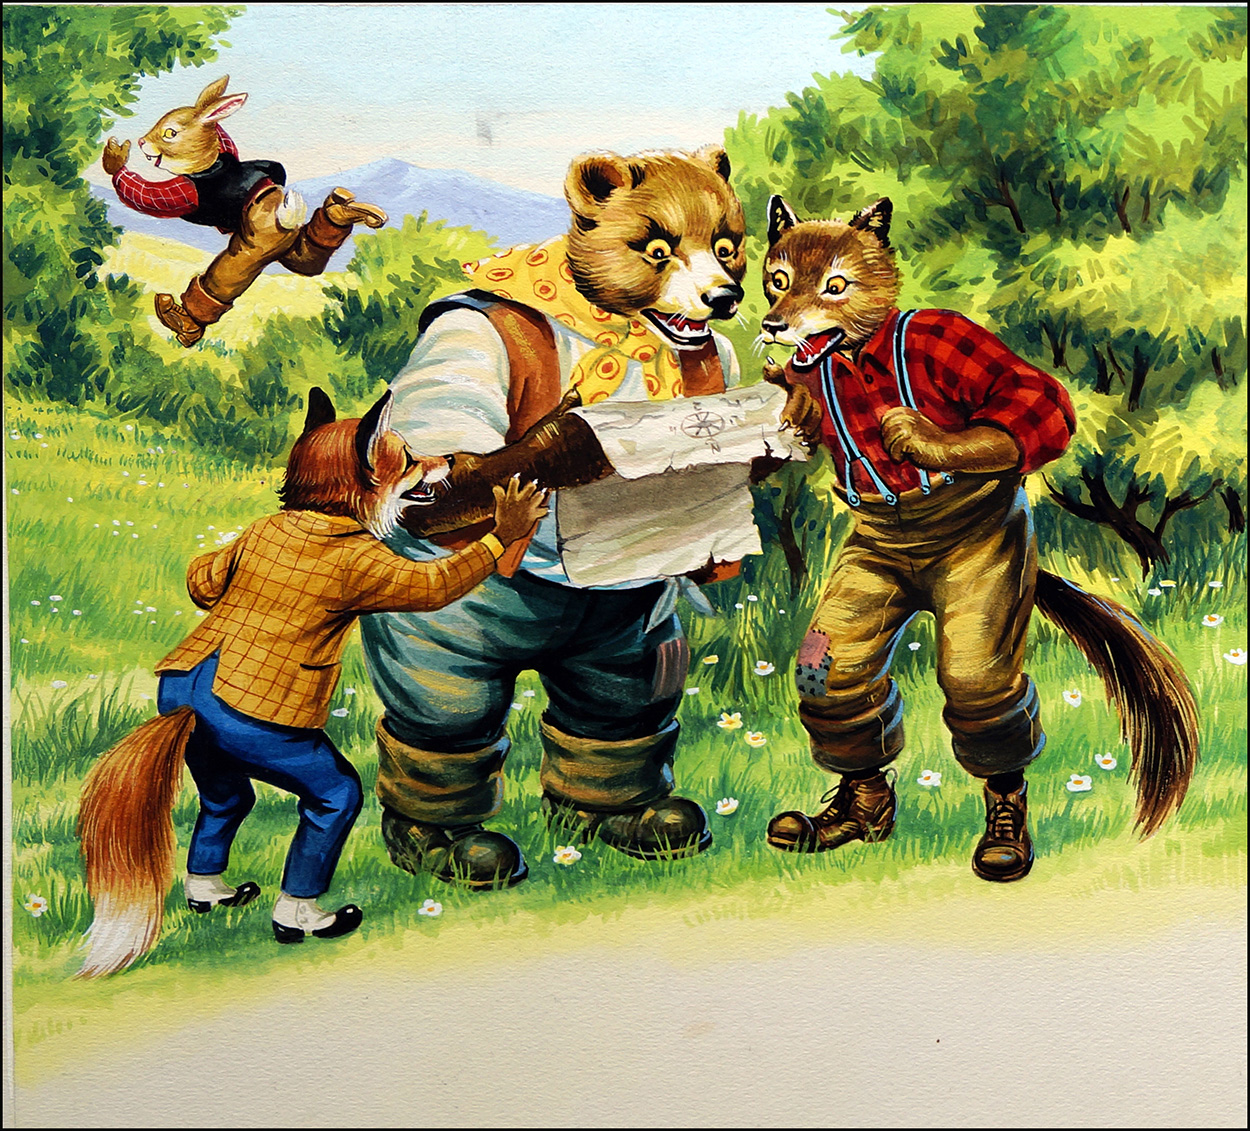 Brer Rabbit: Looking For Clues (Original) art by Henry Fox at The Illustration Art Gallery